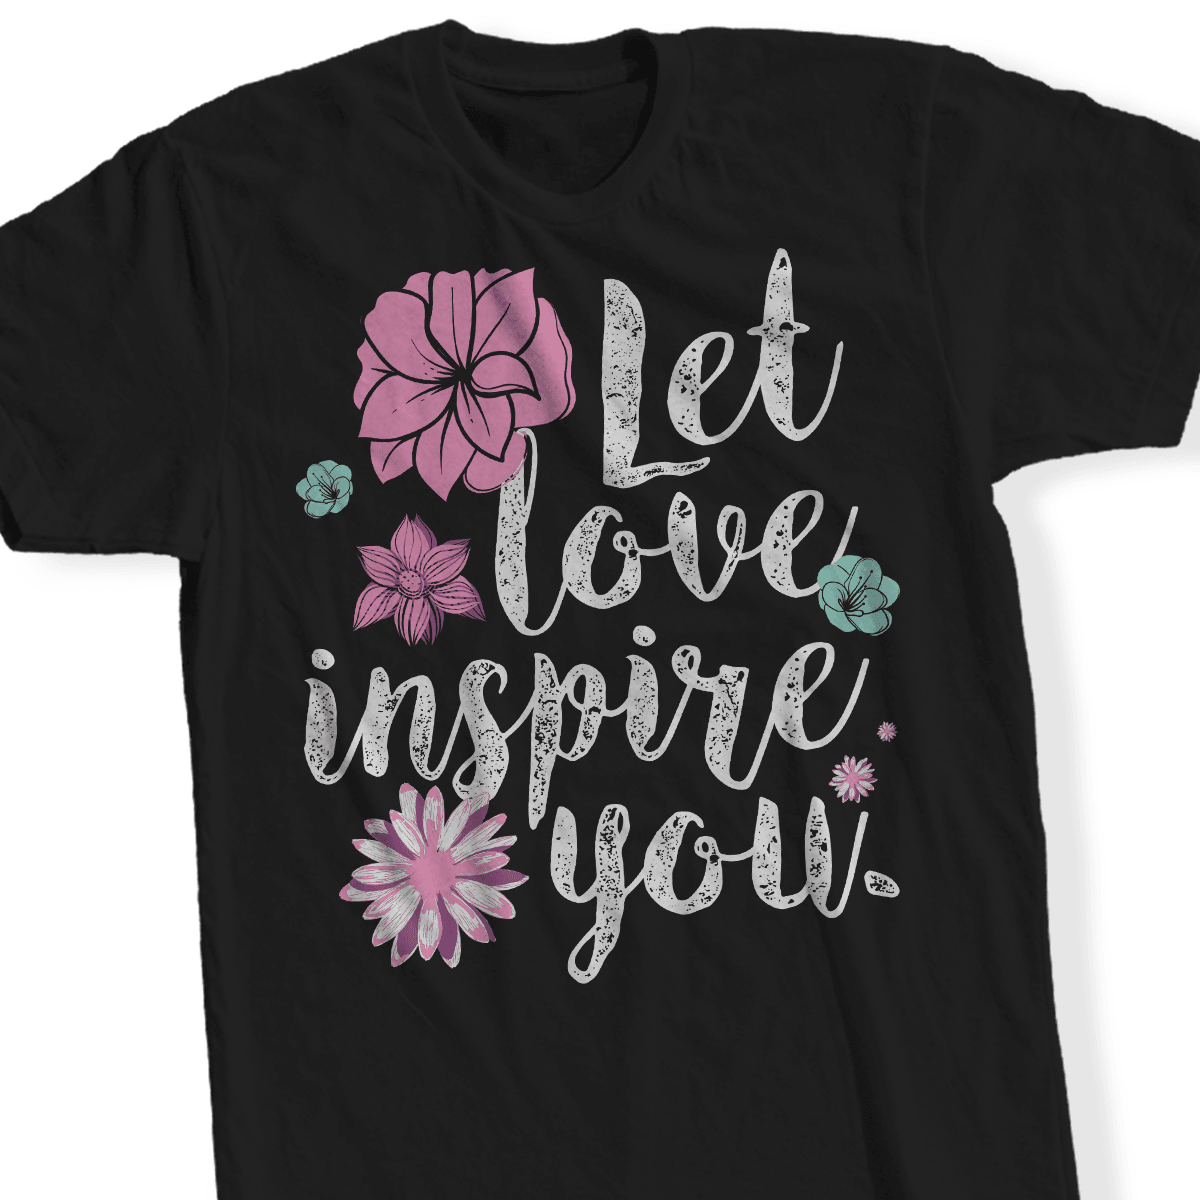 Designs by MyUtopia Shout Out:Let Love Inspire You - T Shirt,Short Sleeve / Black / Small,Adult Unisex T-Shirt